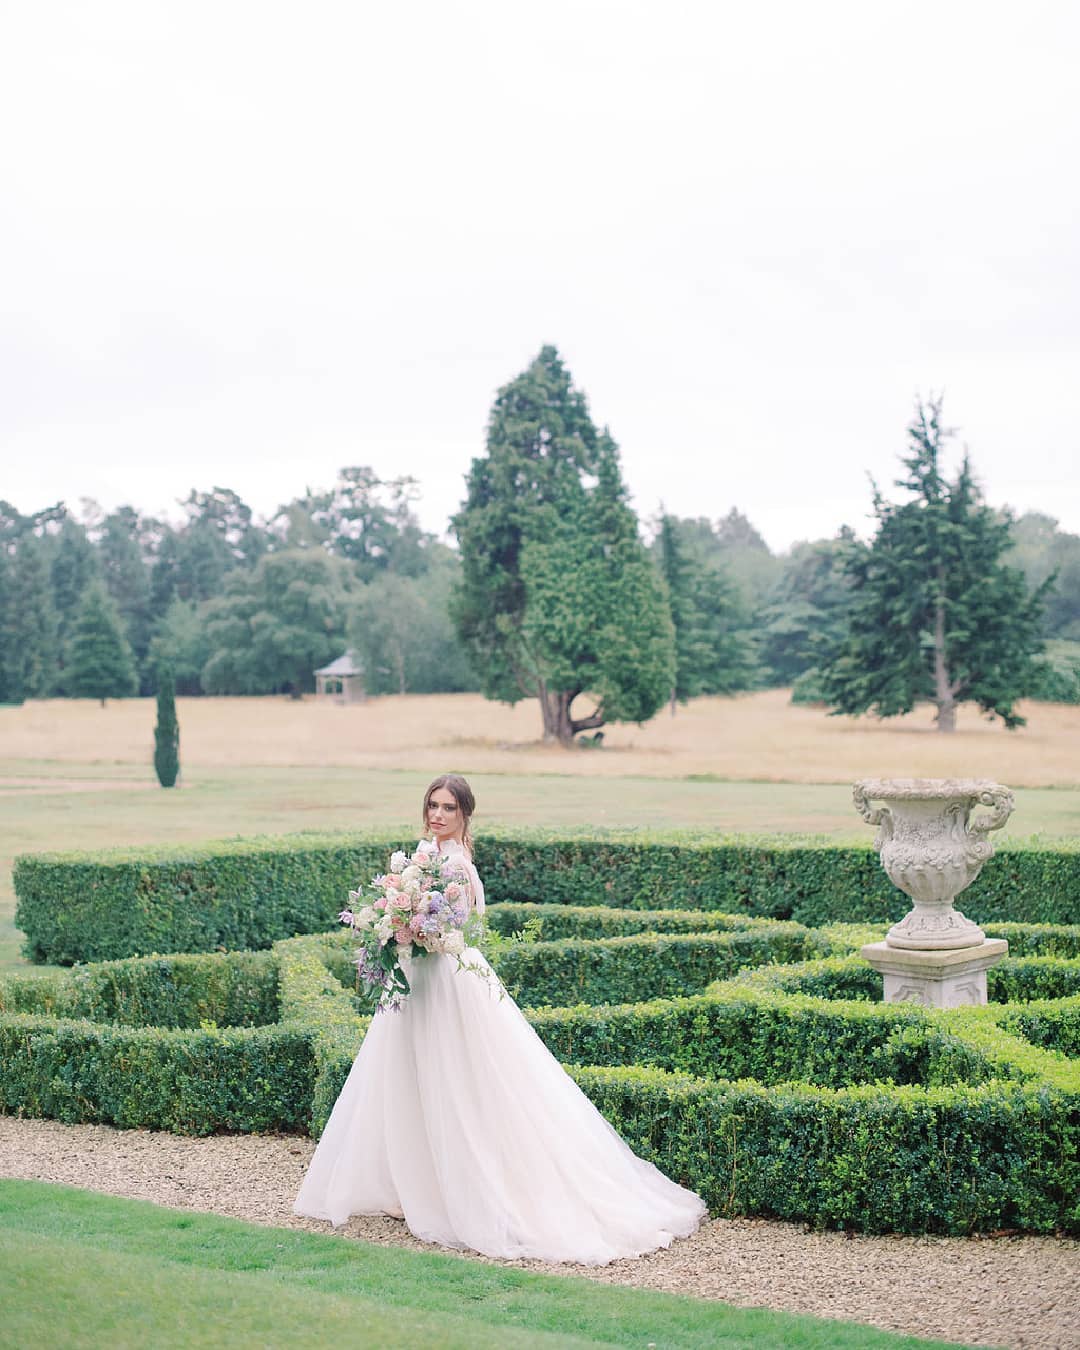 Ines di Santo bridal gown with tulle bow straps and a lush garden bridal bouquet from Moss & Stone at an English country estate, Hedsor House; captured by Julie Livingston and styled by Willow and Oak Events